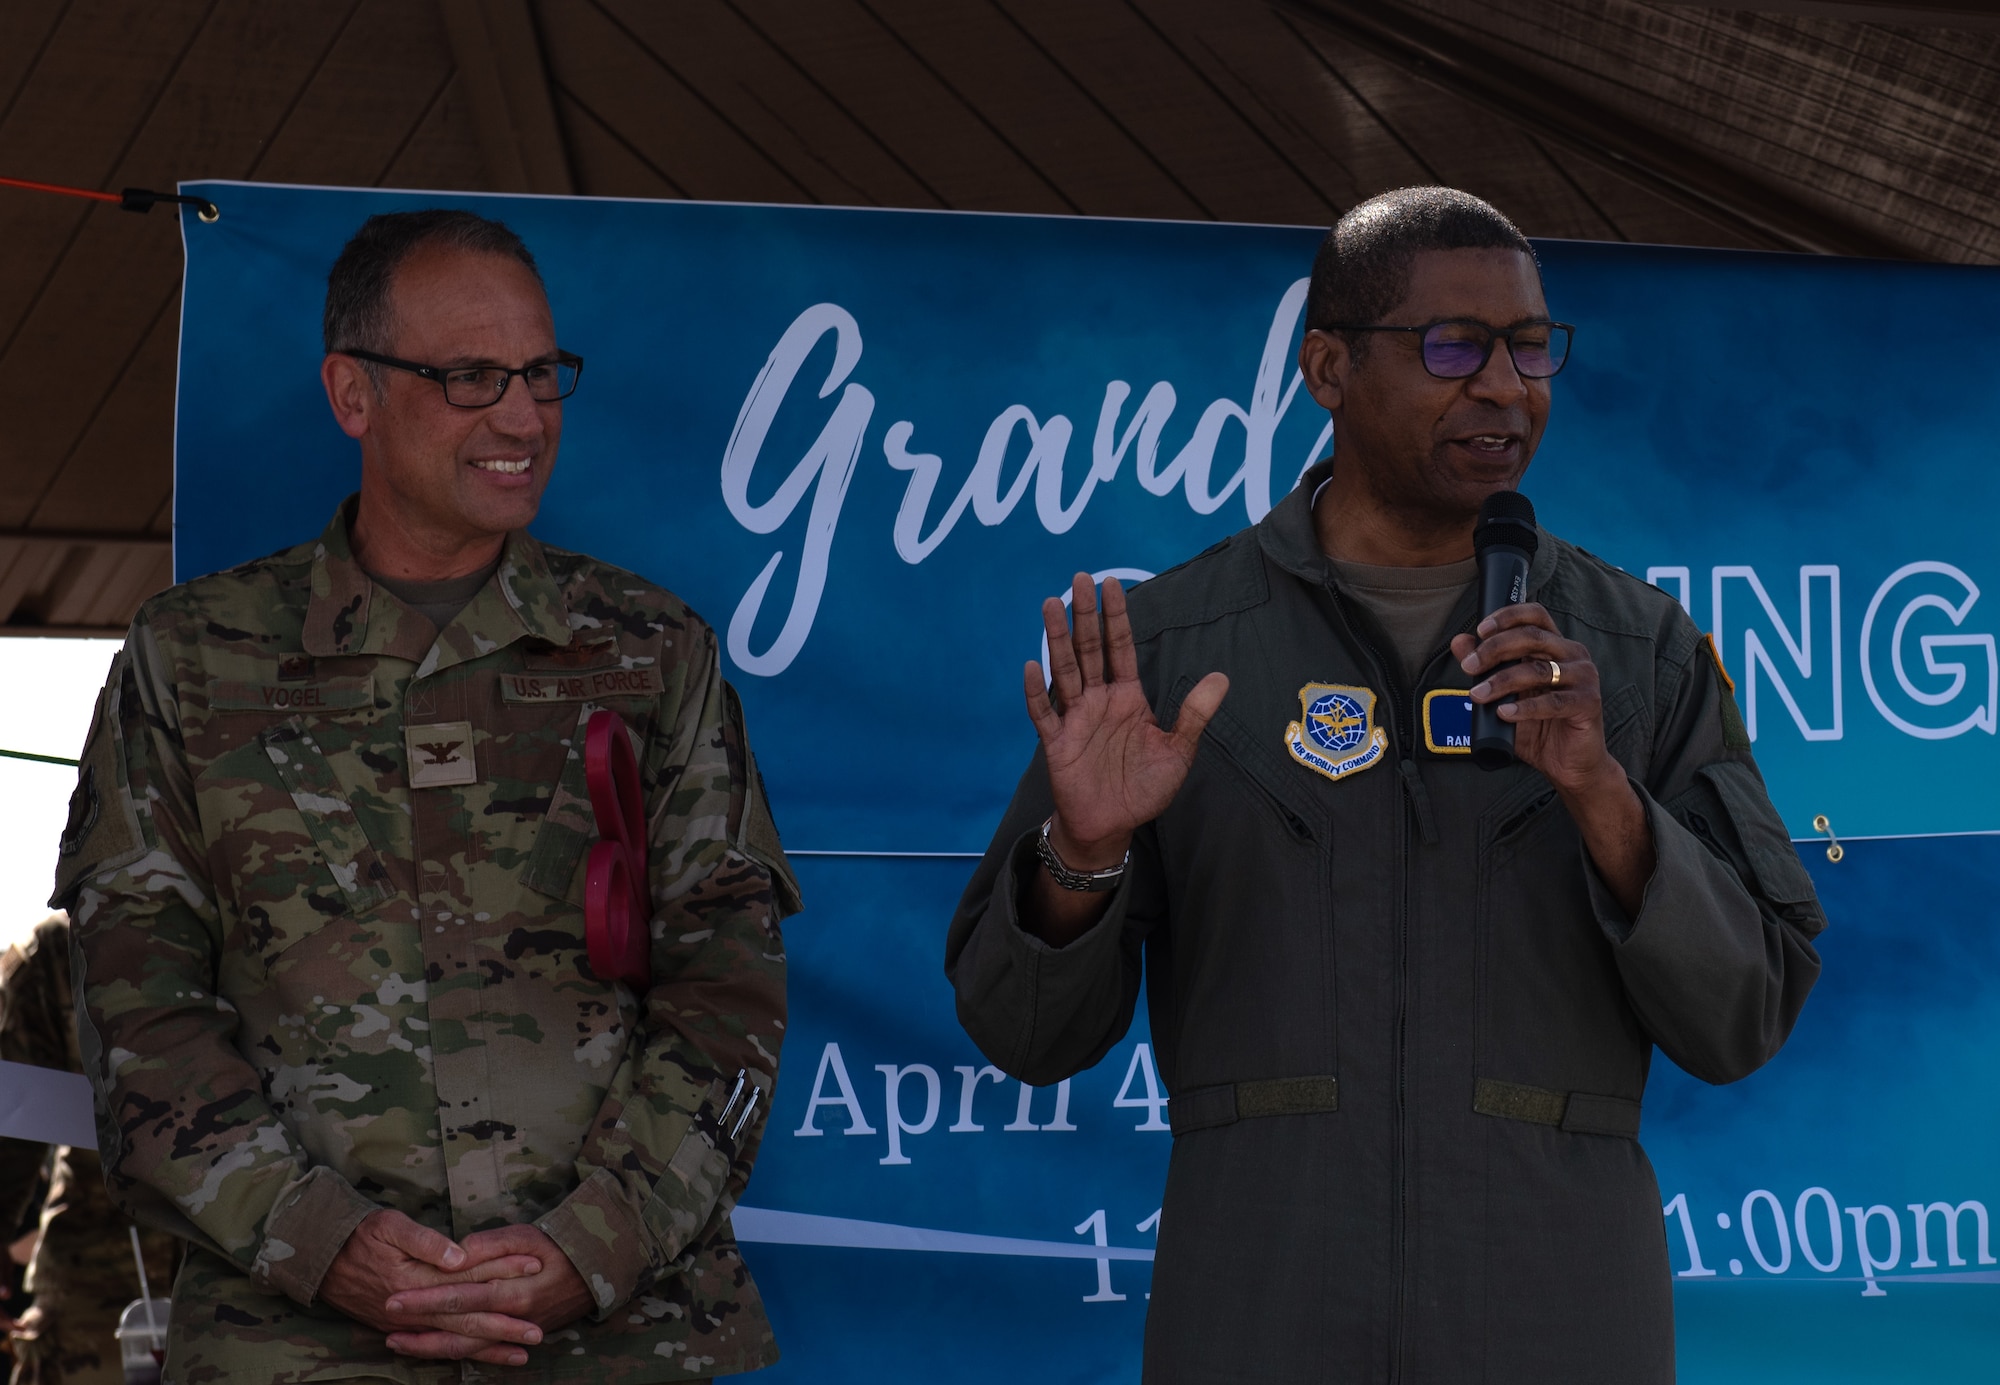 Lt. Gen. Randall Reed, Air Mobility Command deputy commander, gives opening remarks at the grand opening for the food truck park at McConnell Air Force Base, Kansas, April 4, 2023. The food truck park provides a variety of easily accessible food for Team McConnell servicemembers. The area was designated a no hat, no salute area for the grand opening. (U.S. Air Force photo by Staff Sgt. Tryphena Mayhugh)